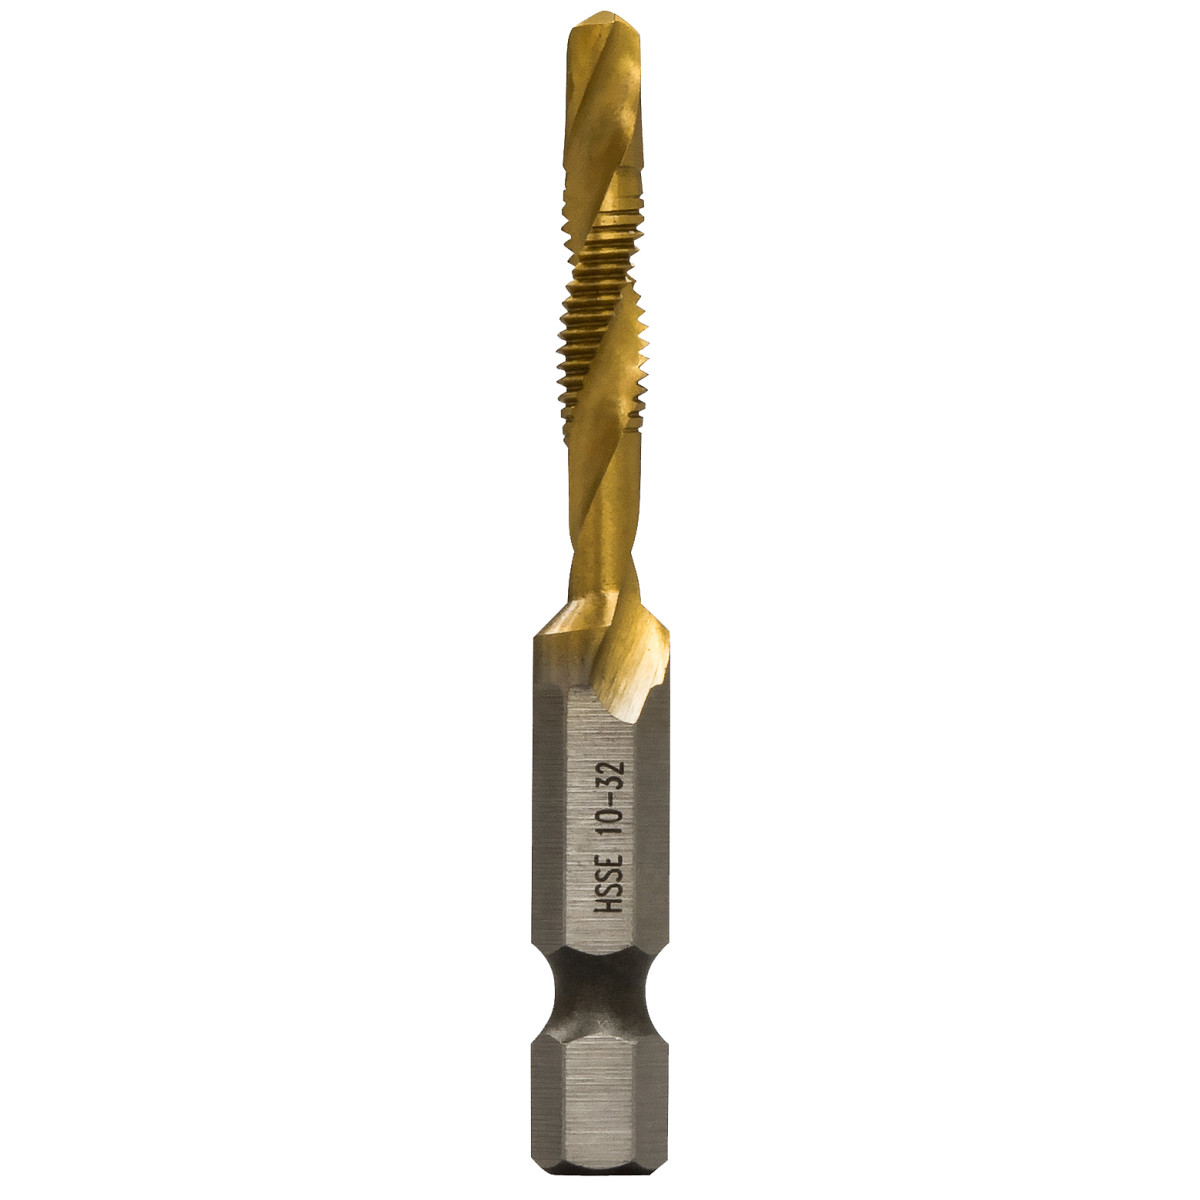 10-32 Split-point tip resists walking and penetrates material faster. Strong, high-speed steel provides superior resistance to heat and abrasion. Titanium Nitride coating ensures that the bits run cooler, drill faster, and last longer. Optimized core for significantly reduced torque on the user and extended tool life. Designed to drill in up to 1/4